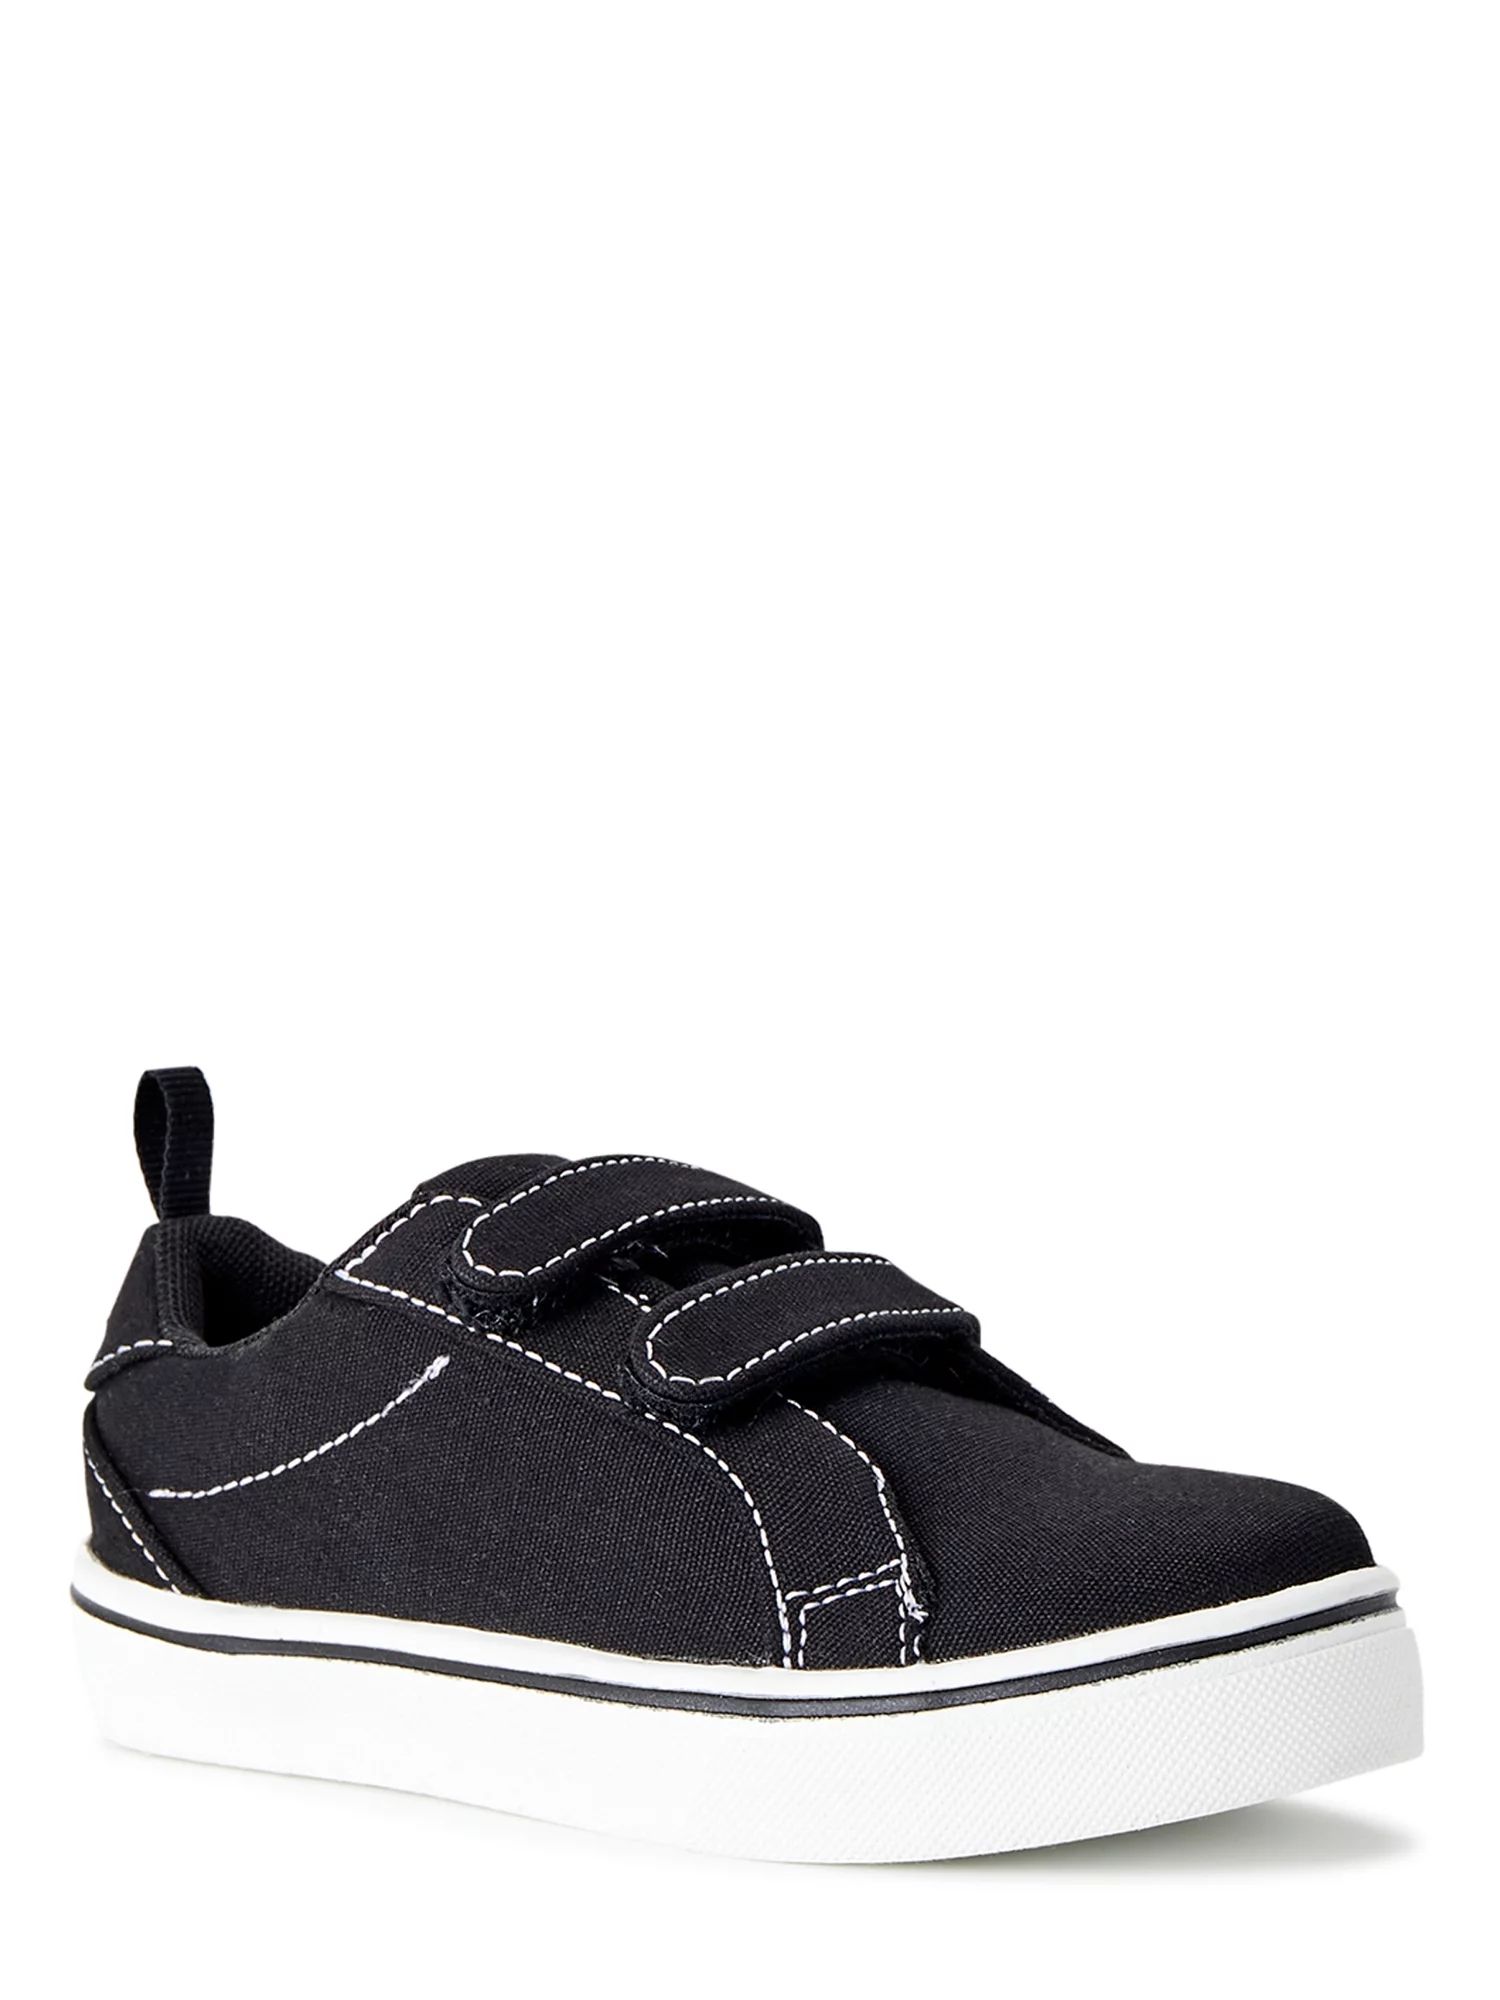 Wonder Nation Toddler Boys Casual Canvas Sneakers, Sizes 7-12 | Walmart (US)